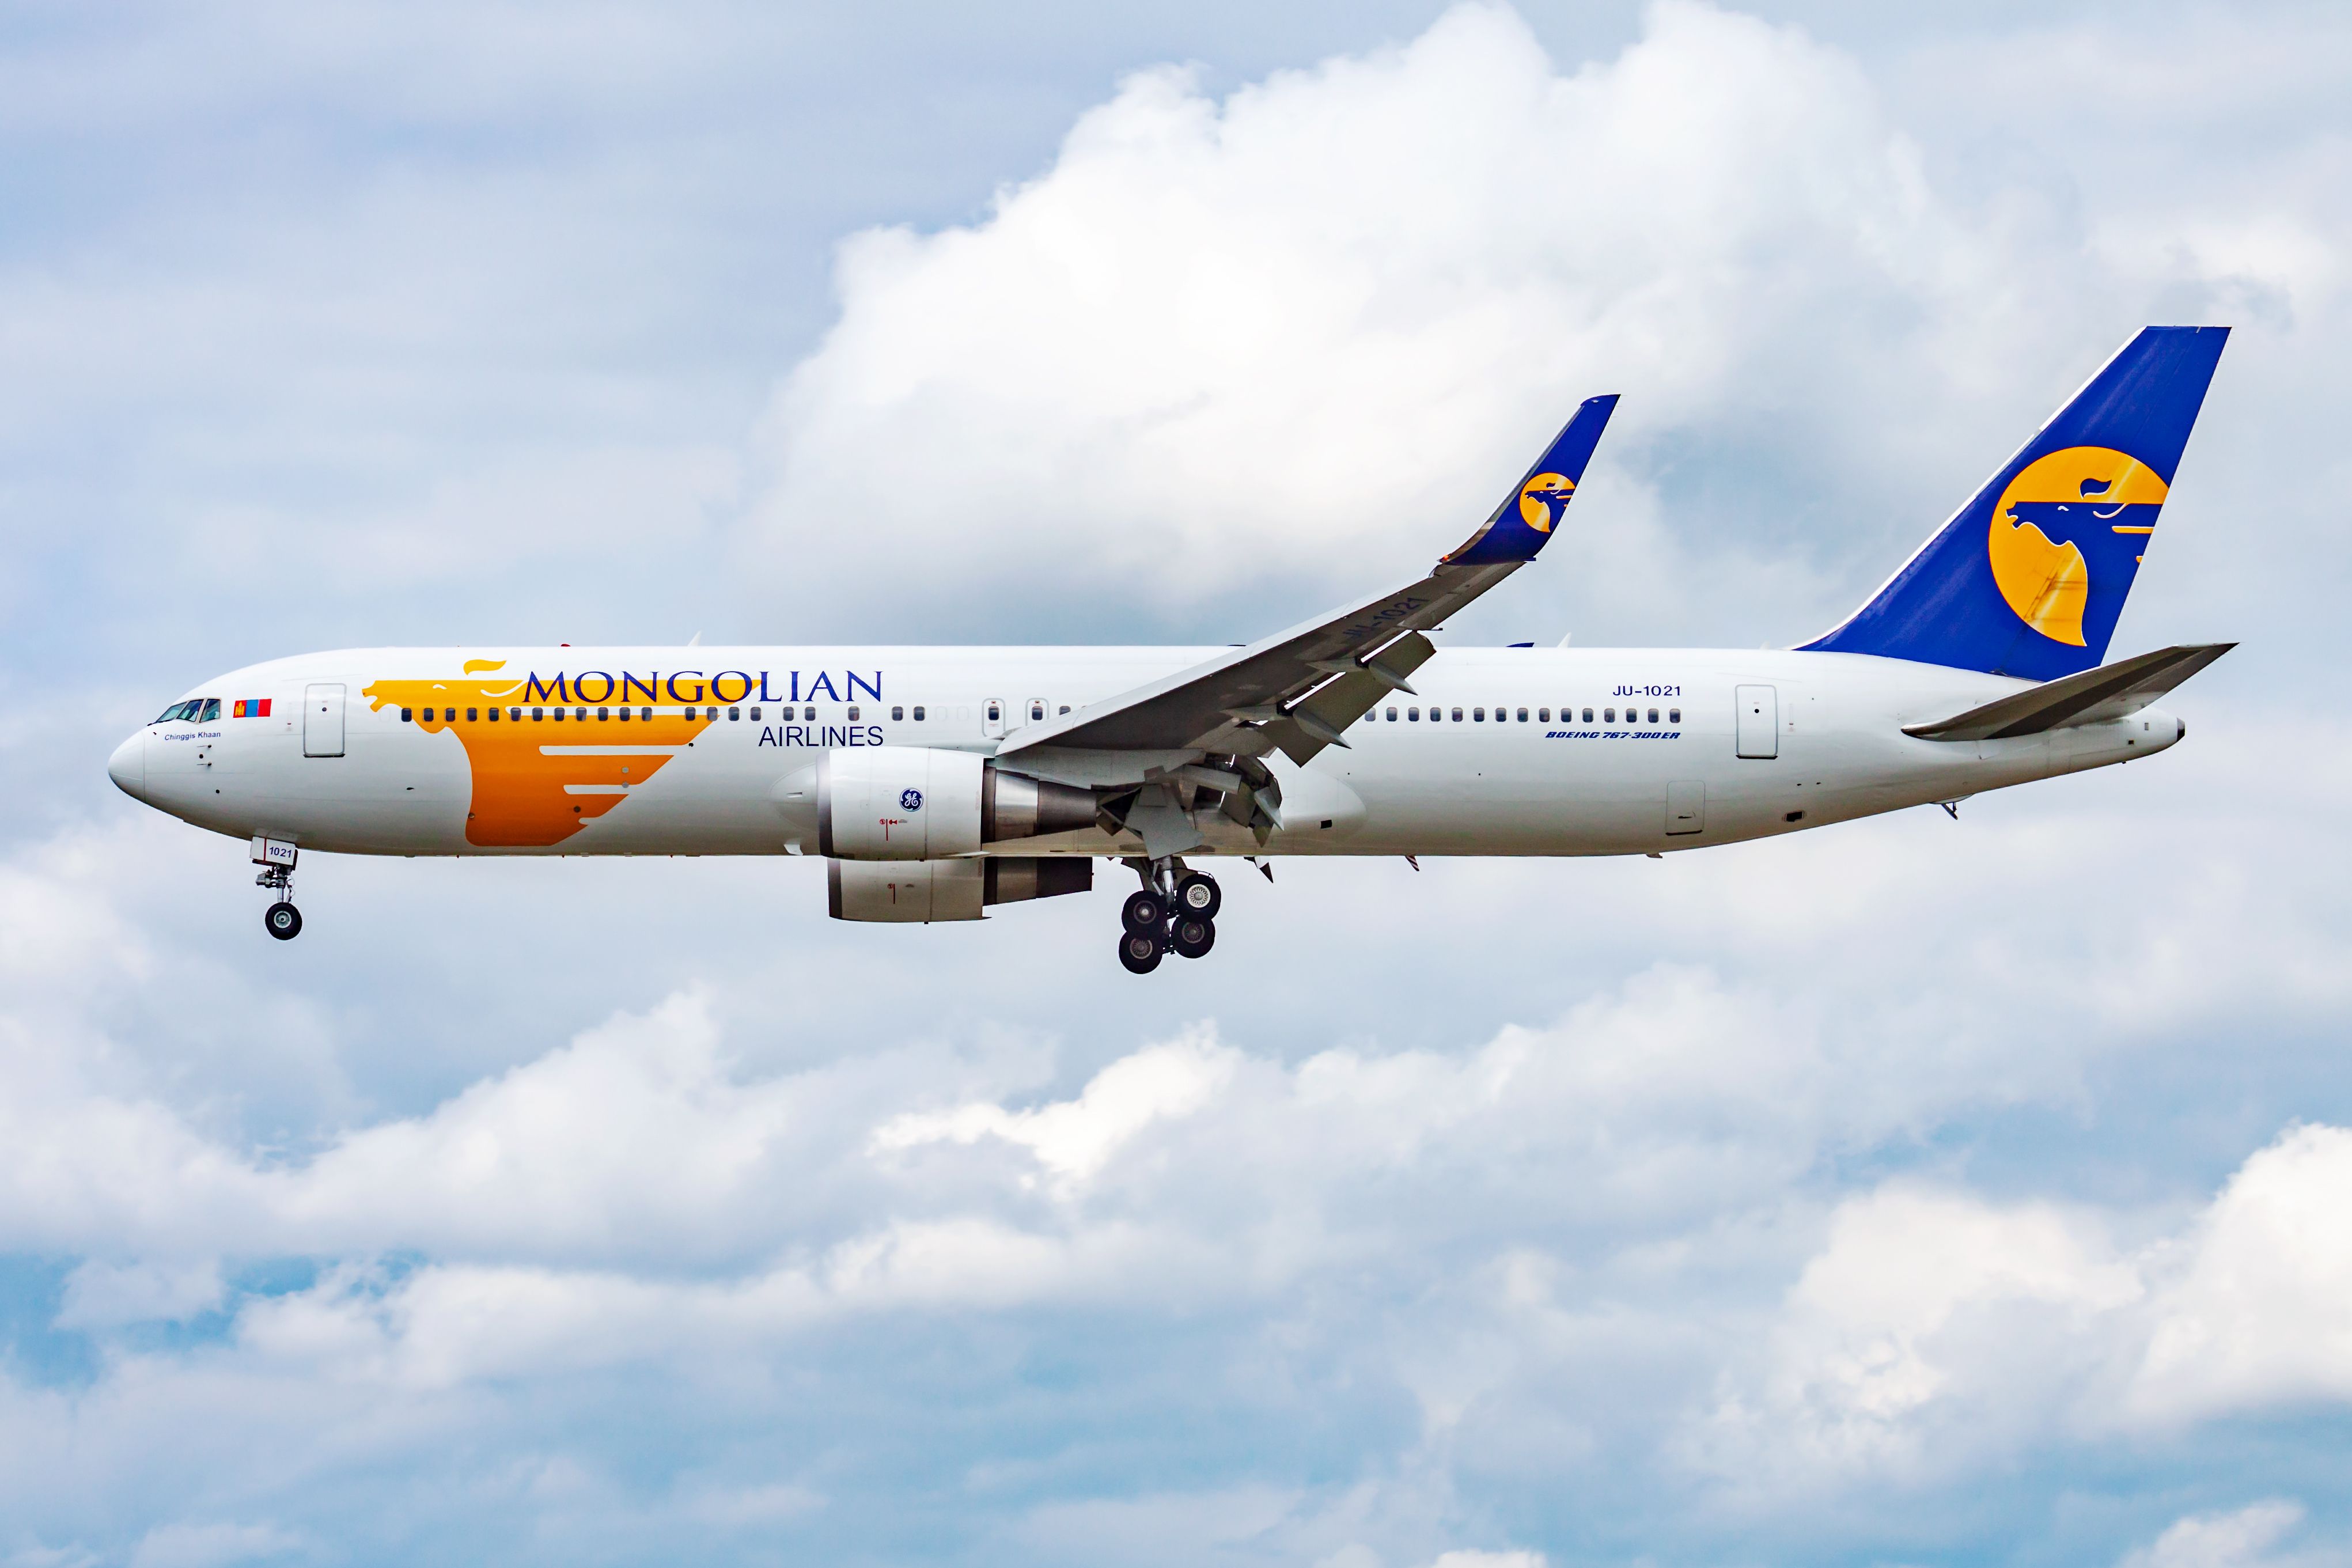 A MIAT Mongolian Airlines Boeing 767-300 